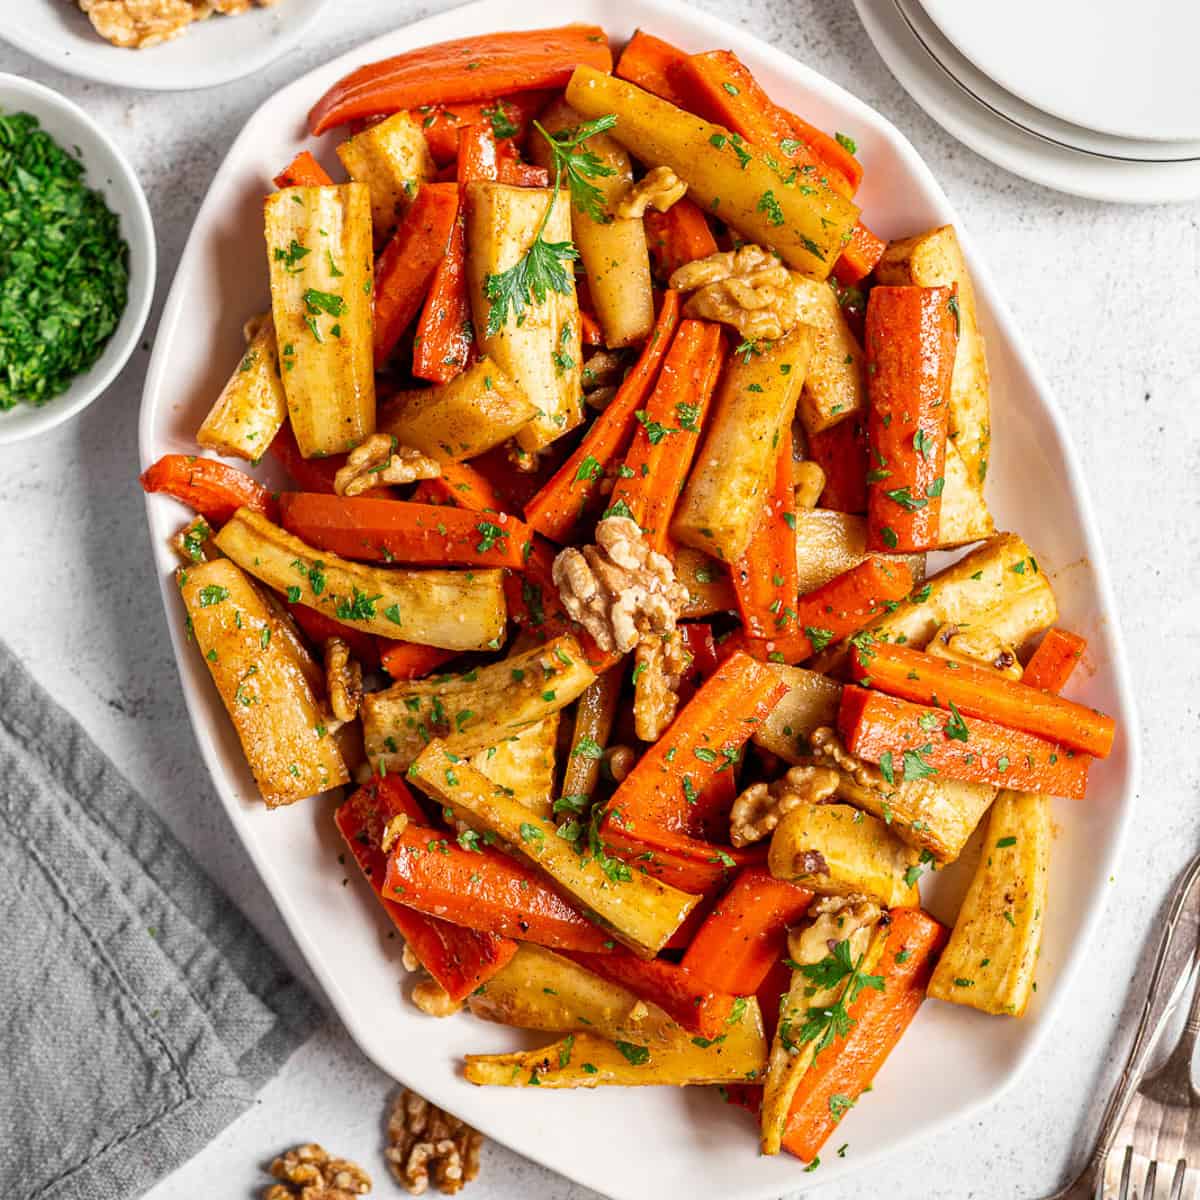 Honey roasted carrots and parsnips